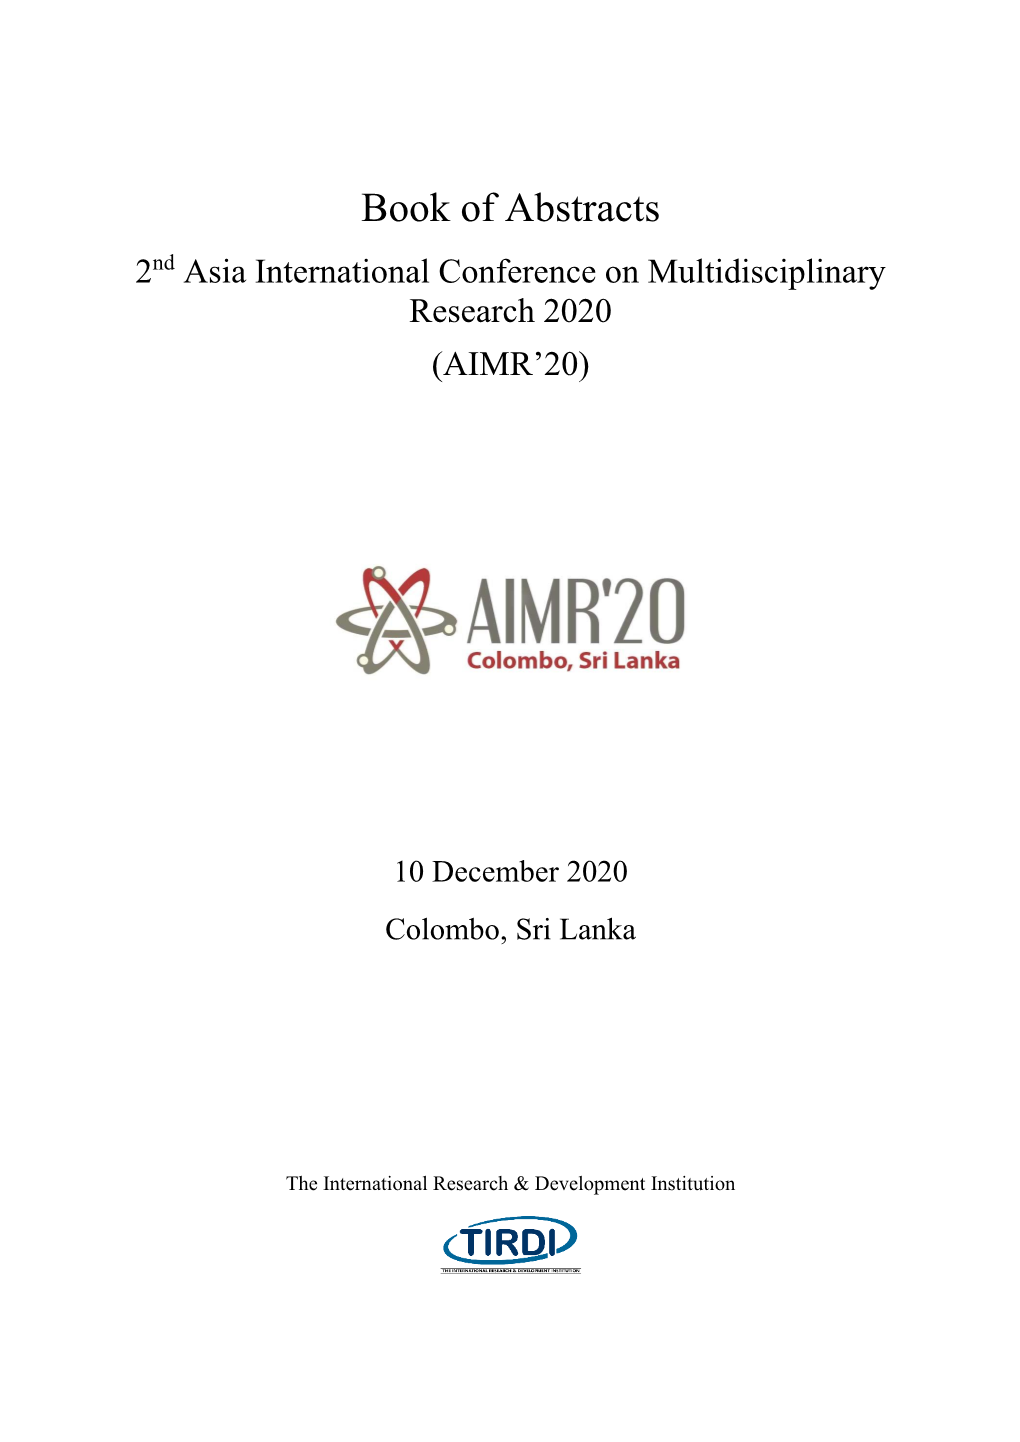 Book of Abstracts 2Nd Asia International Conference on Multidisciplinary Research 2020 (AIMR’20)